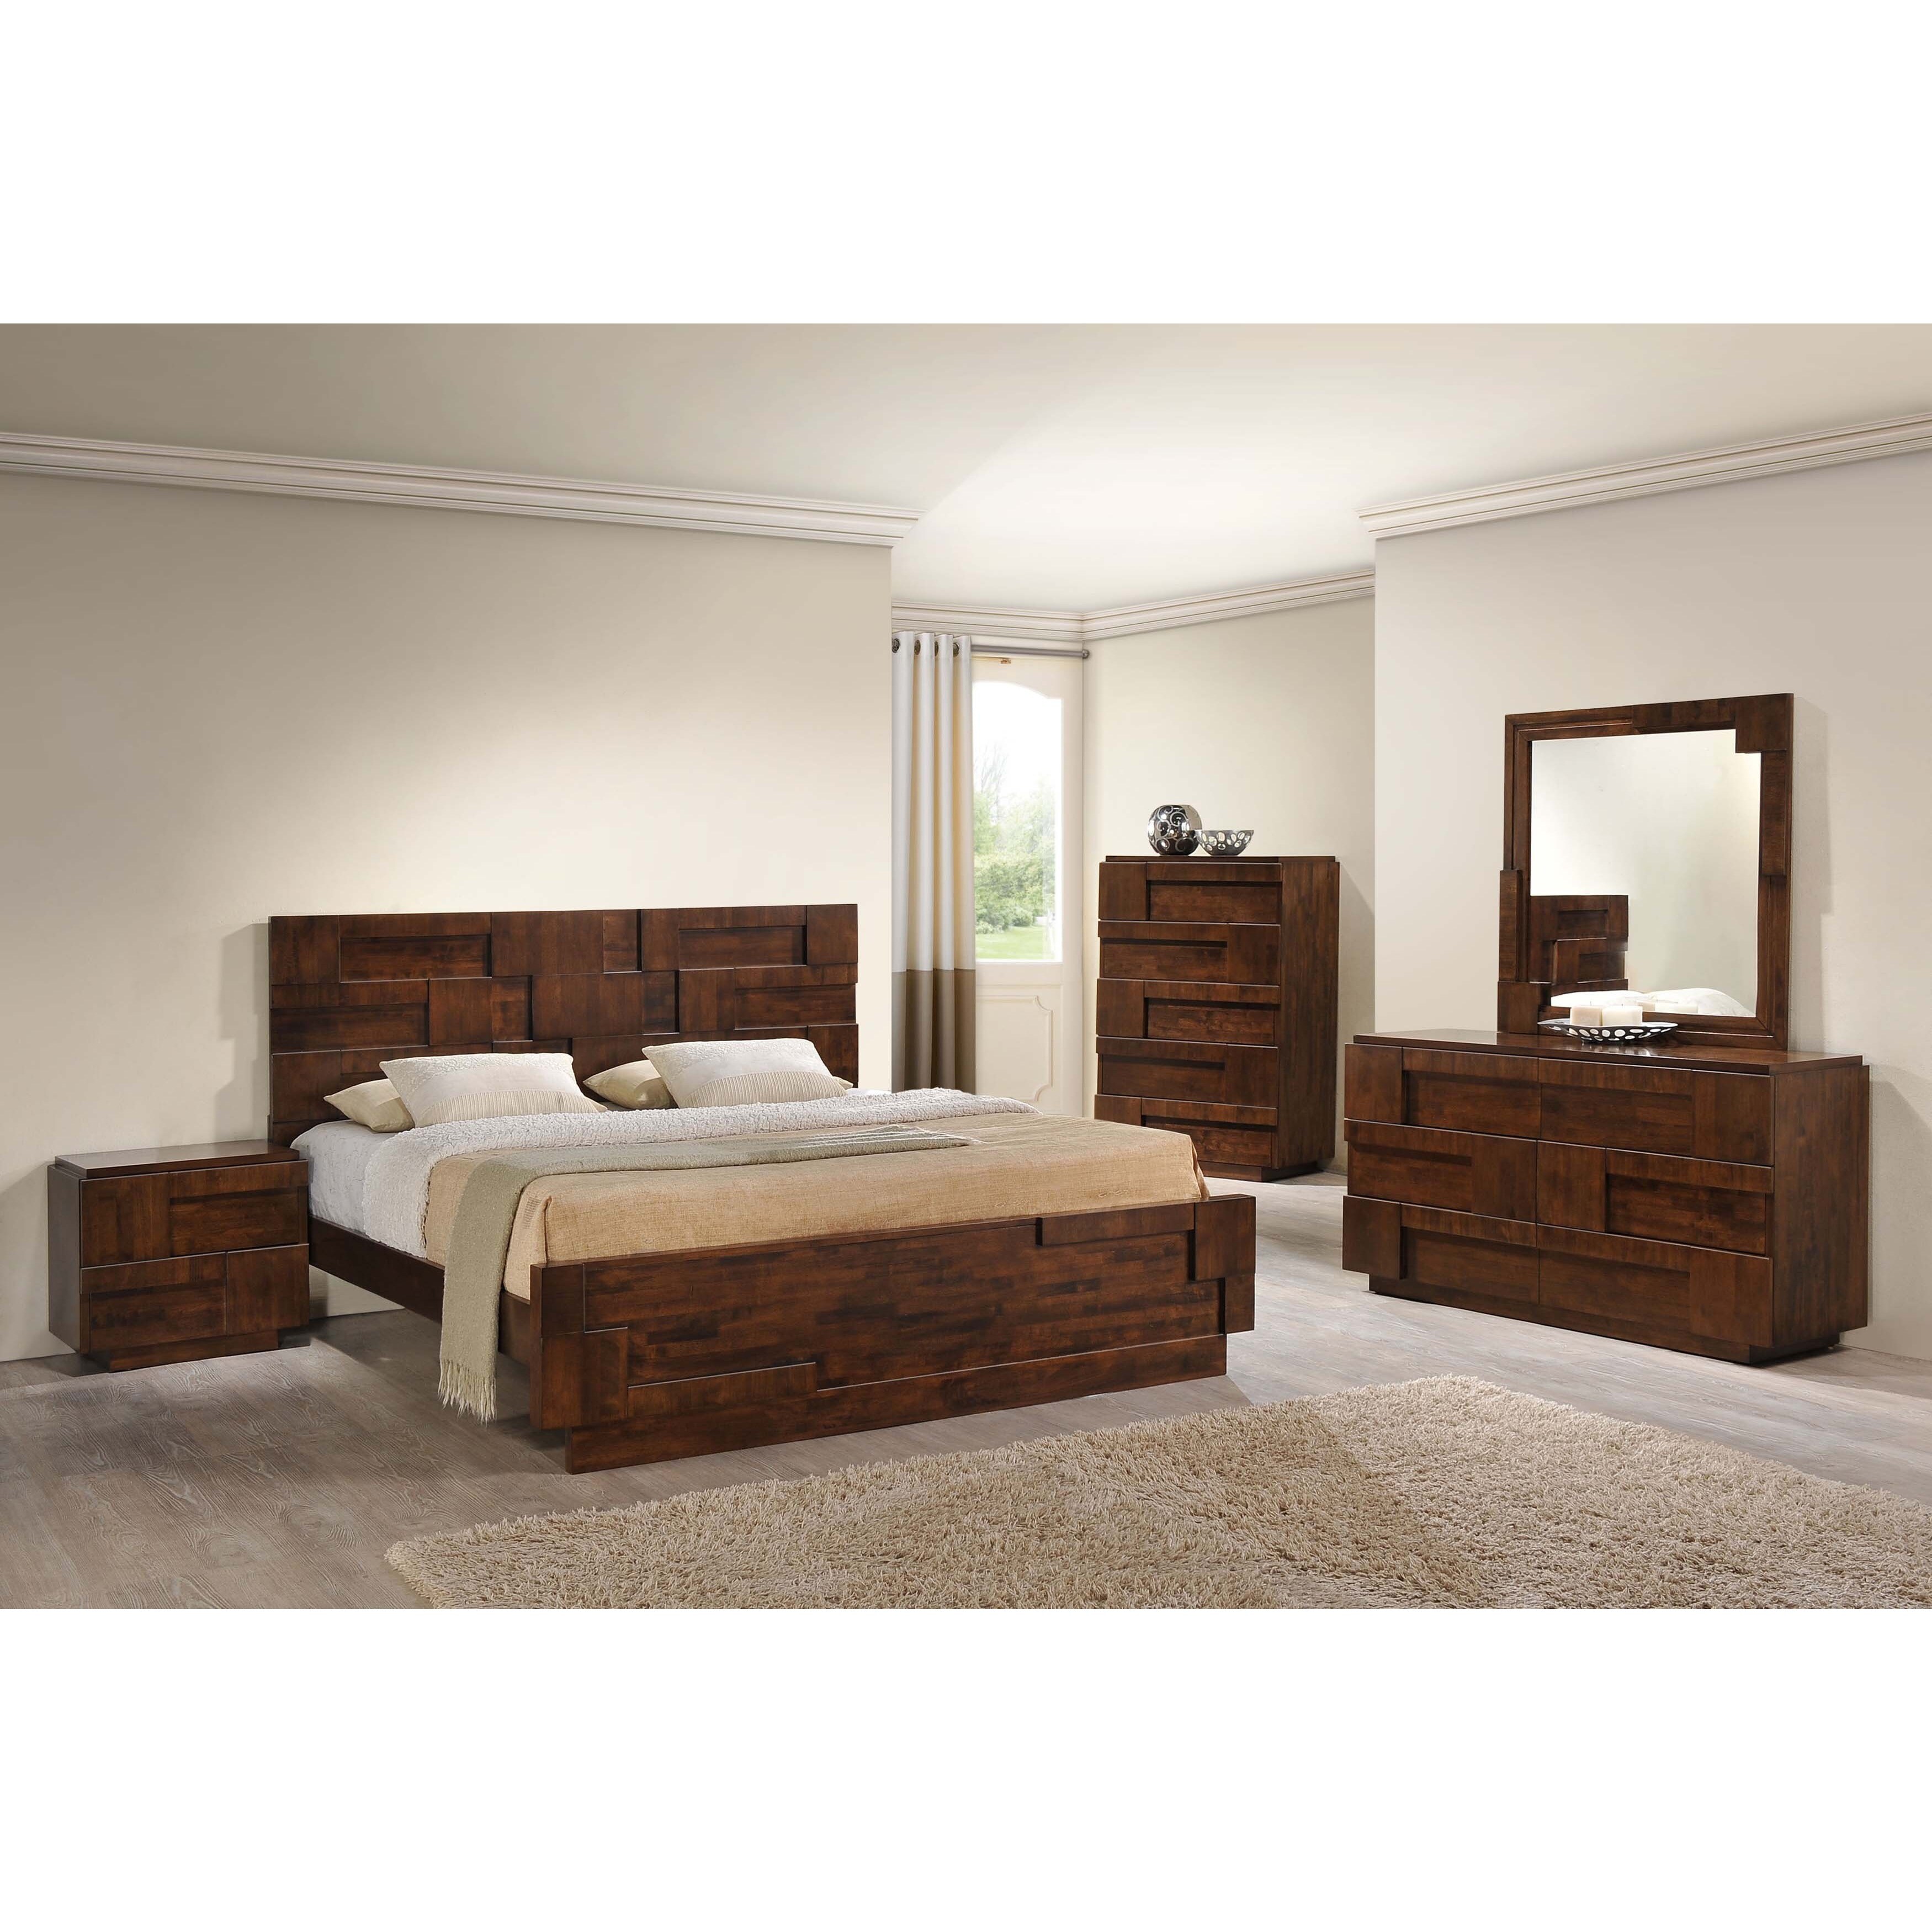 Shop San Diego Bedroom Collection Overstock 9541531